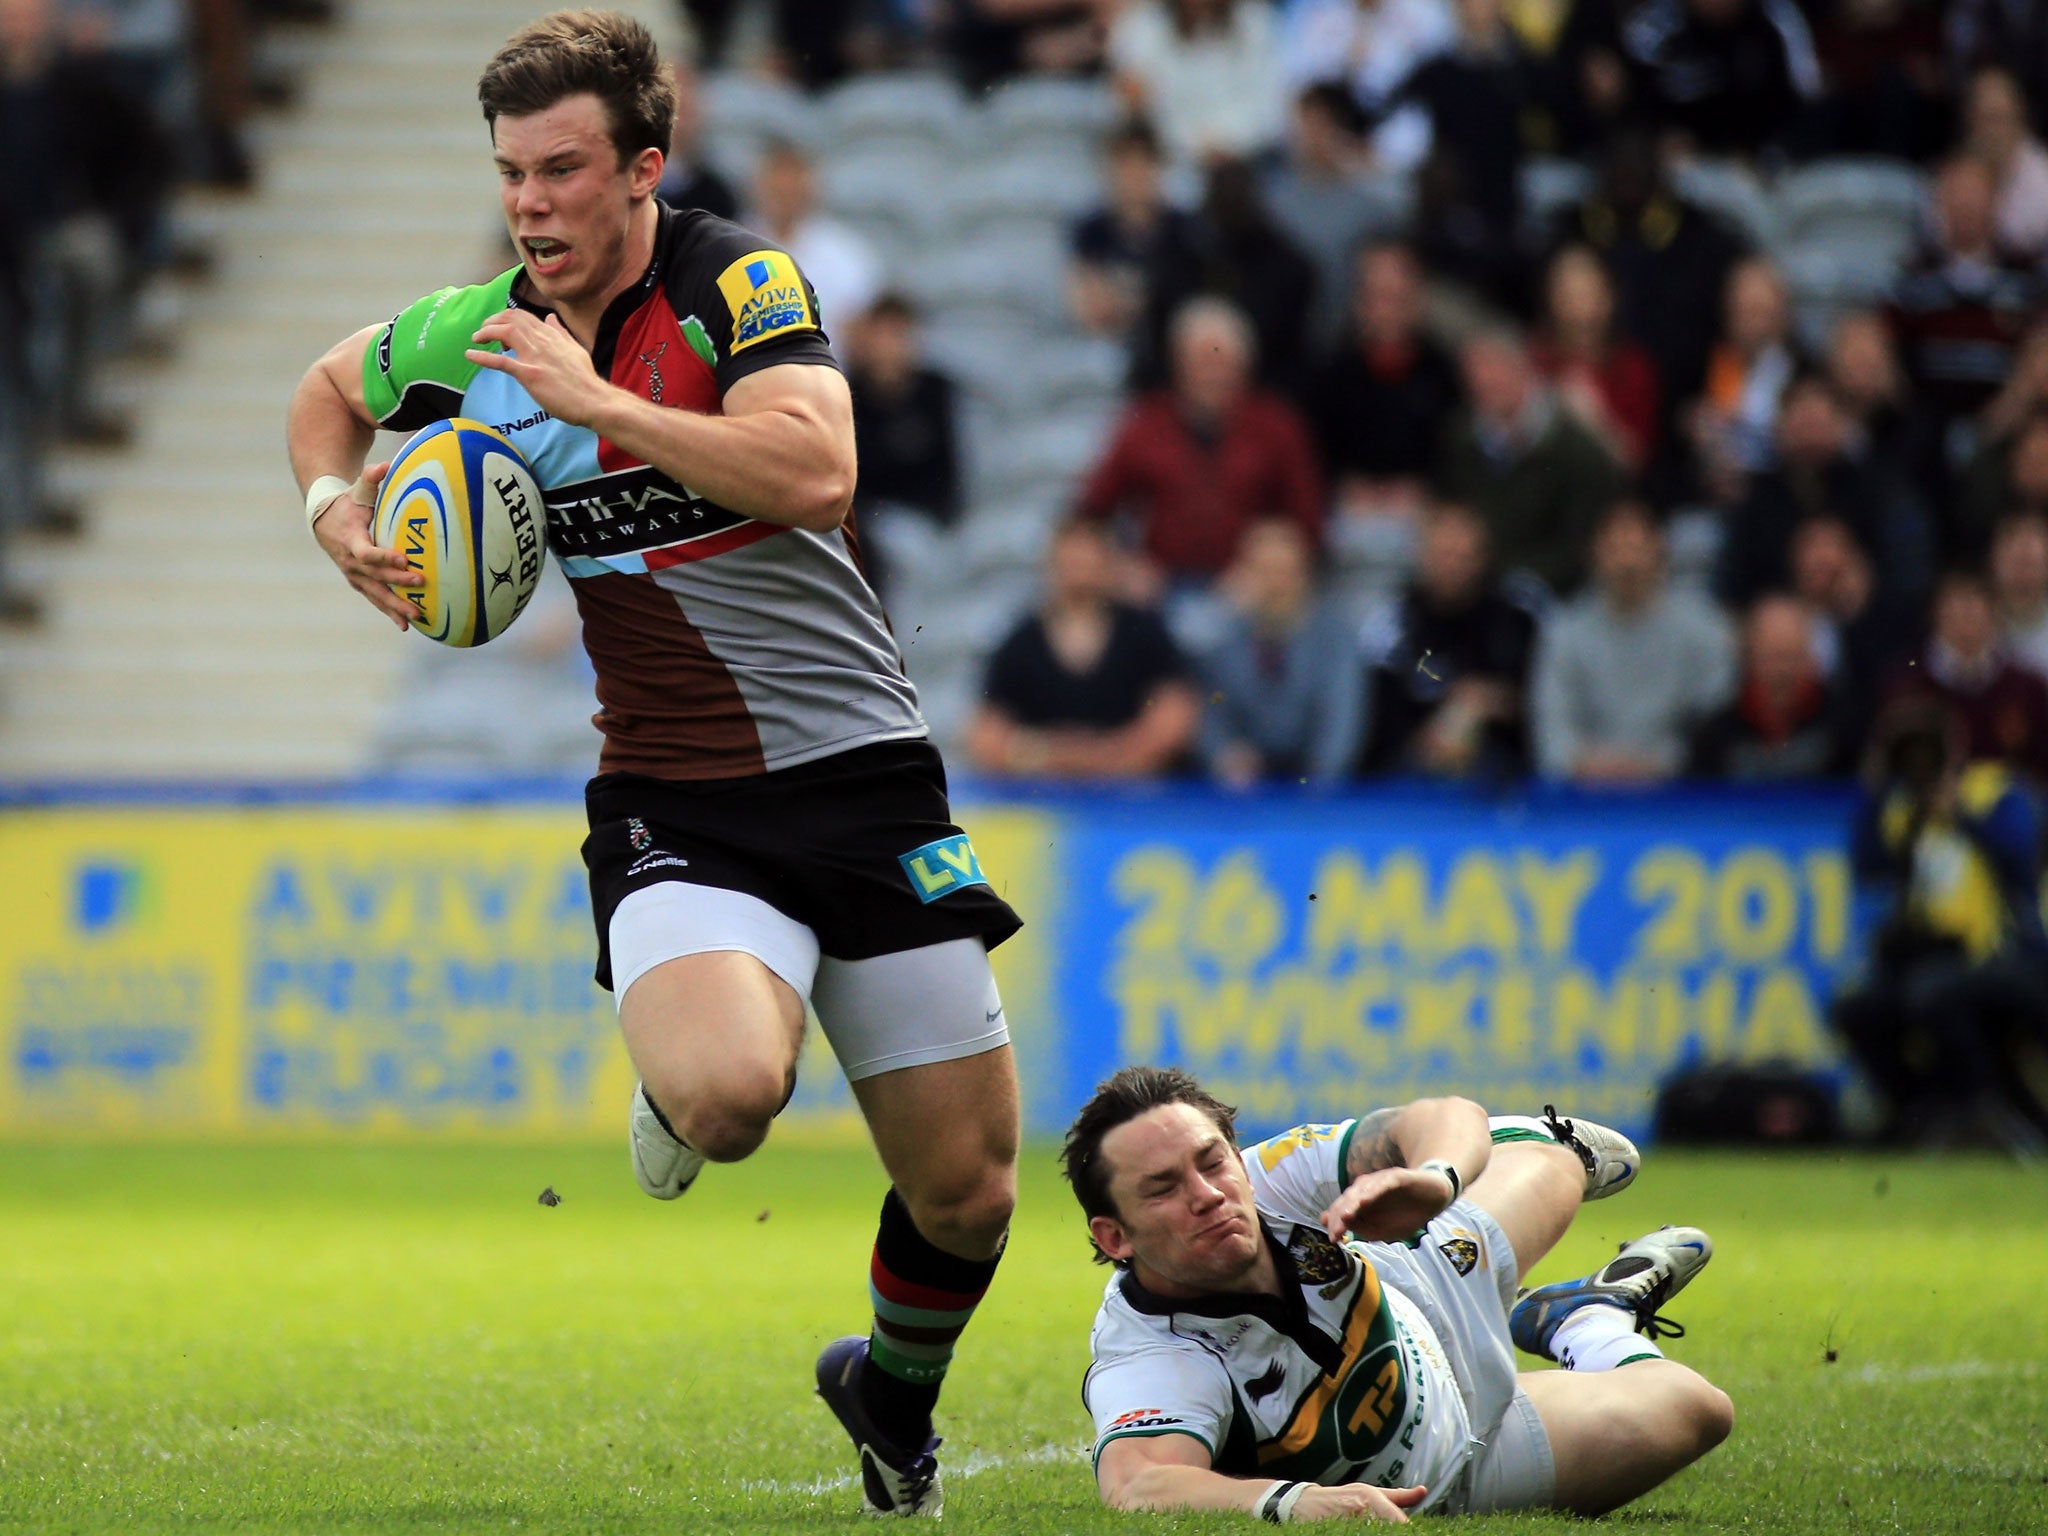 Brace yourself: Sam Smith scored two tries in a comprehensive win